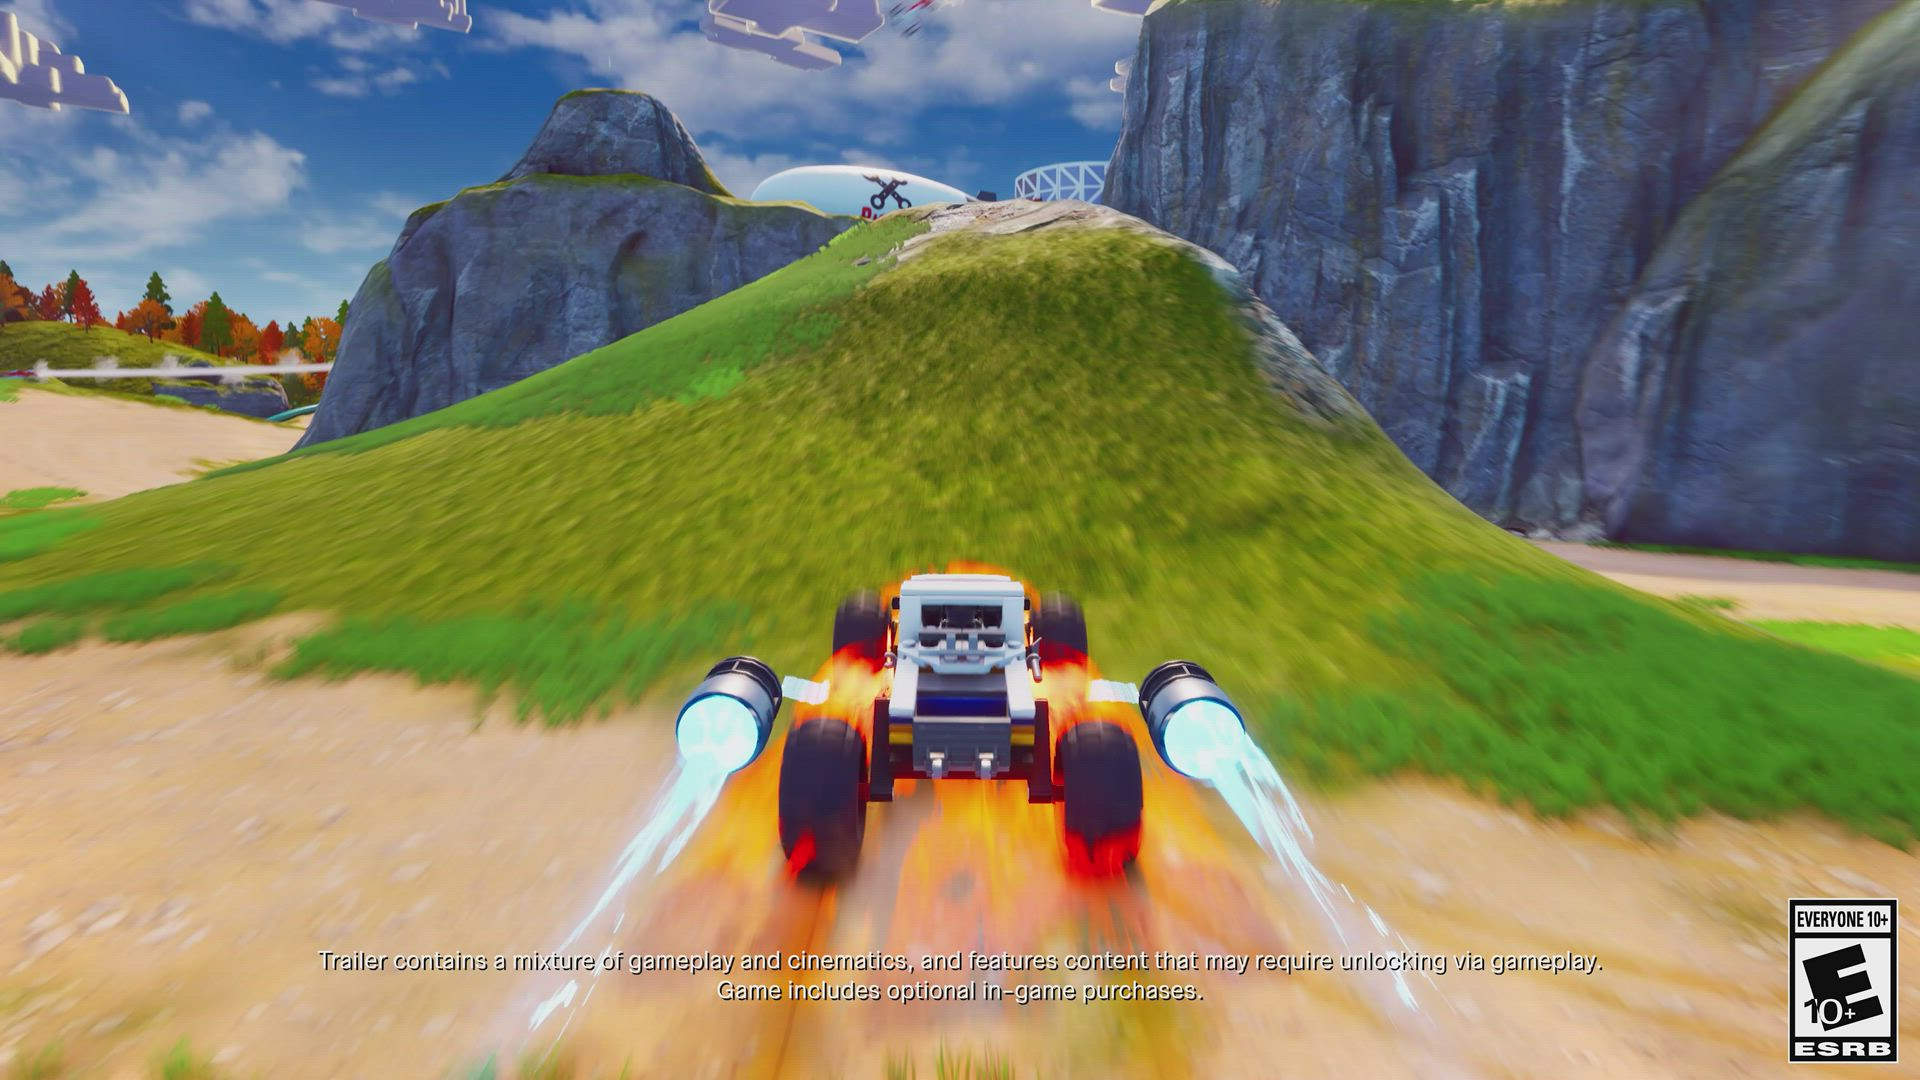 Playing ONLINE in the Open World in LEGO 2K Drive!